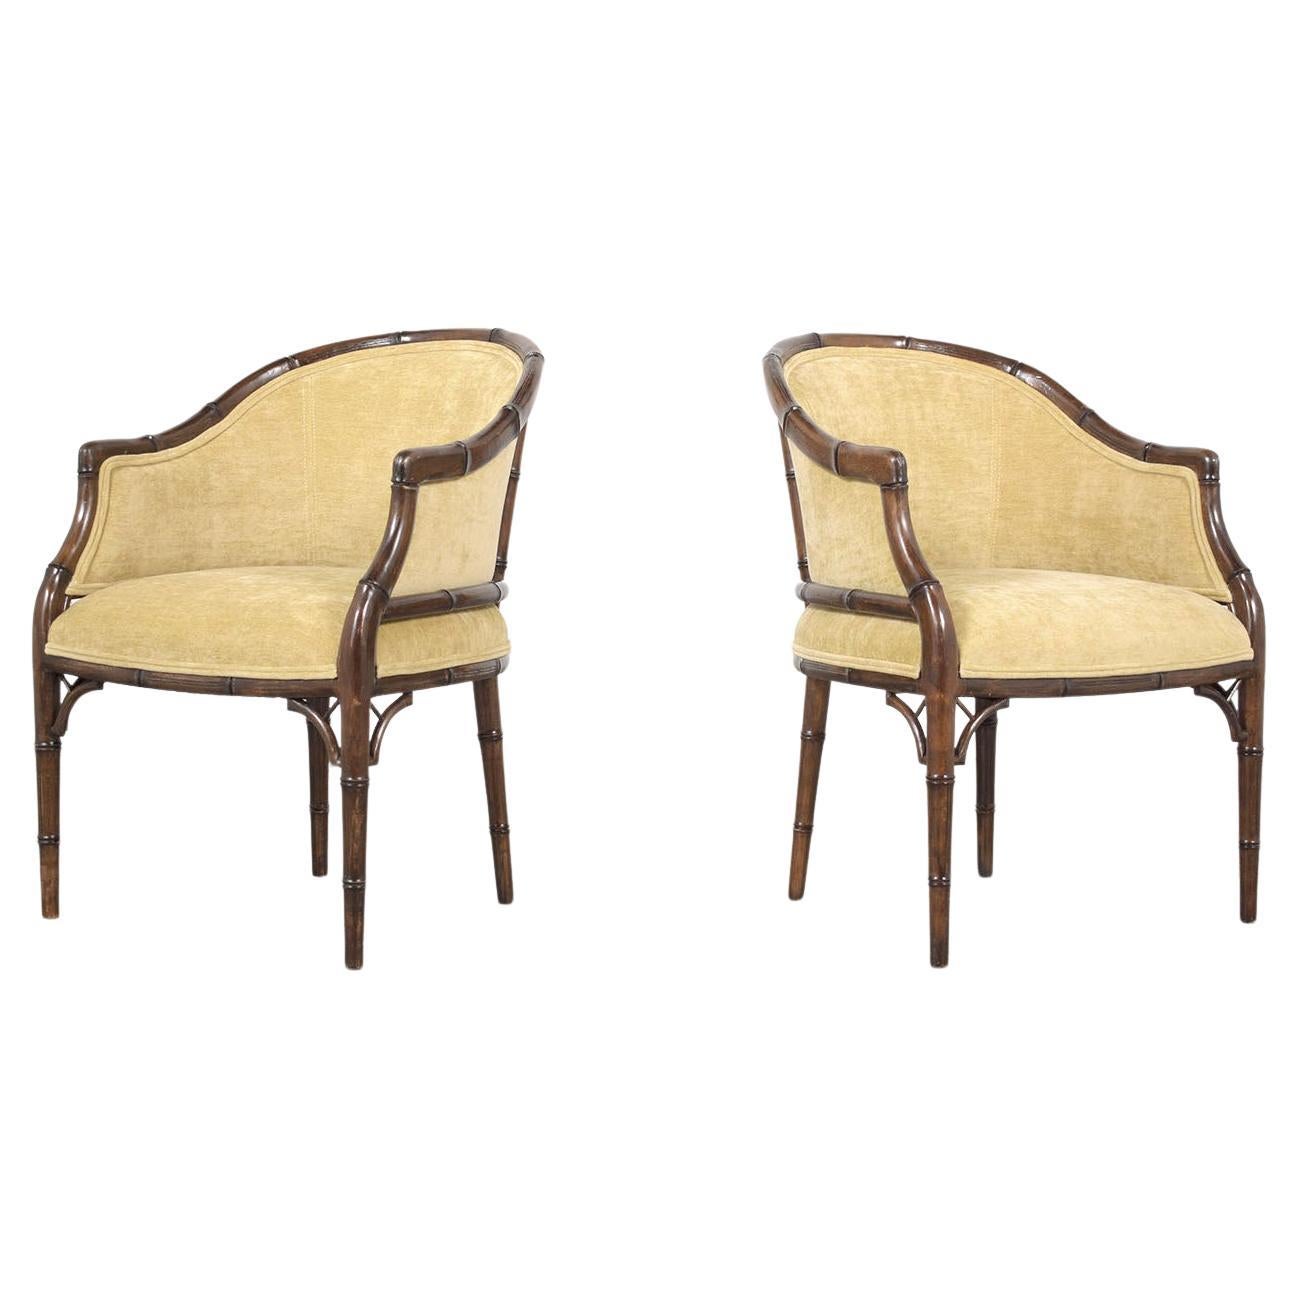 Vintage Hollywood Regency Velvet Armchairs with Bamboo-Carved Frame